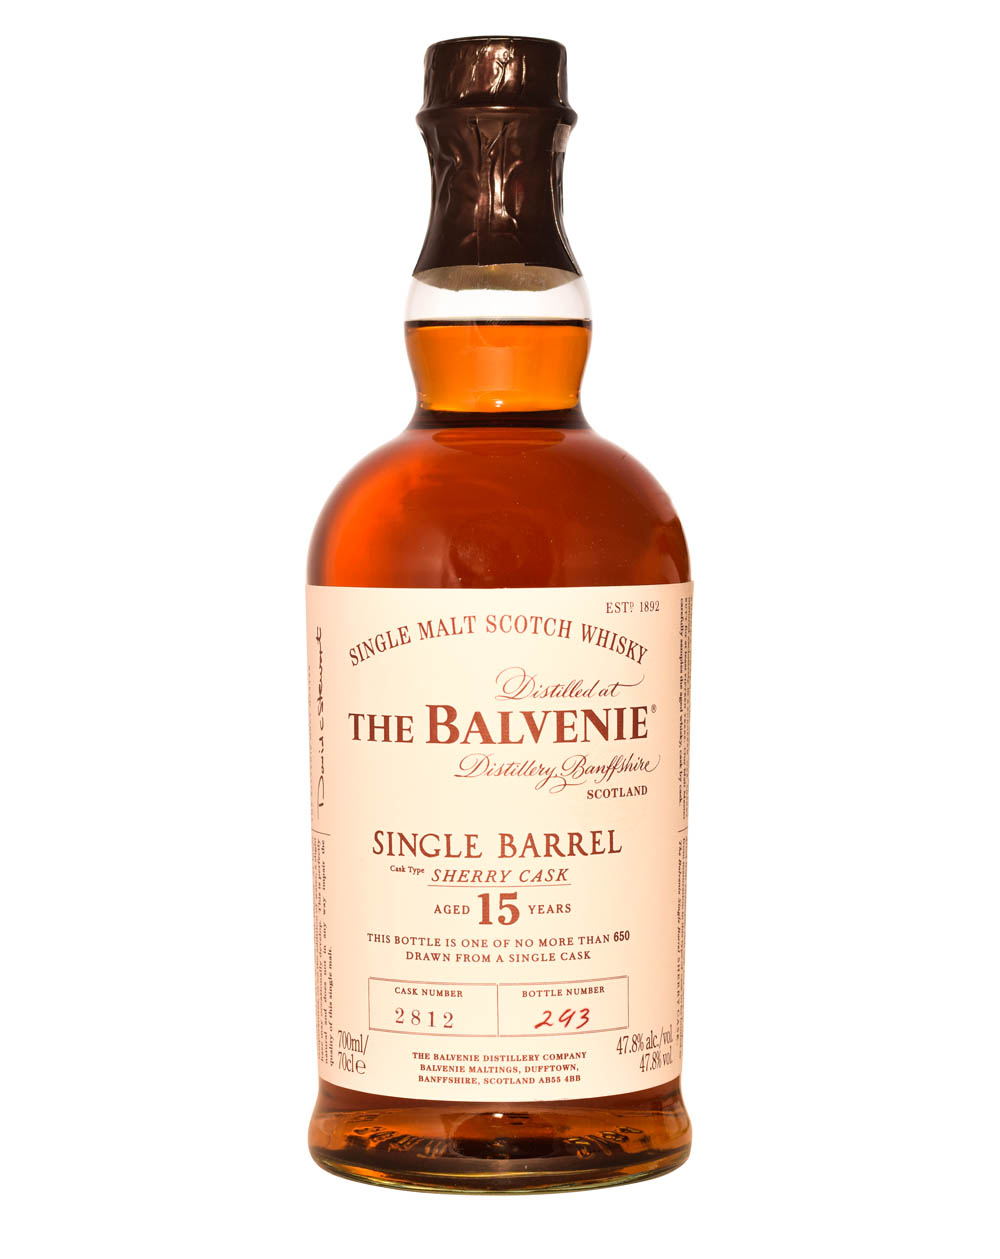 Balvenie Single Barrel Sherry Cask #2812 (15 Years Old) Musthave Malts MHM